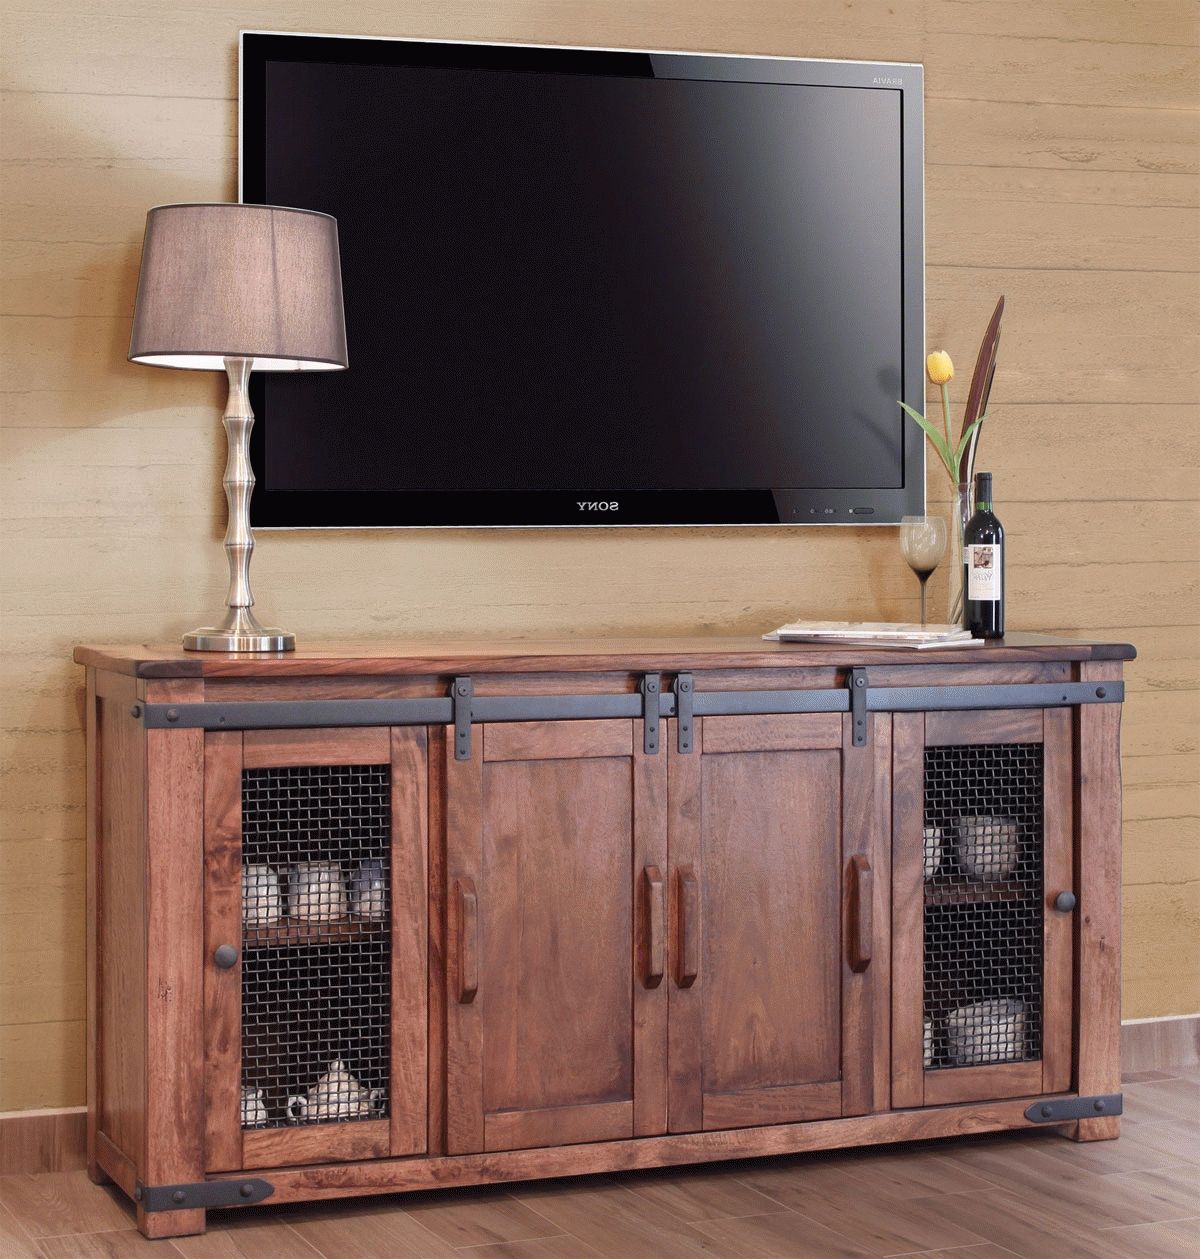 Rustic Tv Stand, Wood Tv Stand, Pine Tv Stand With Regard To Rustic Red Tv Stands (View 8 of 20)